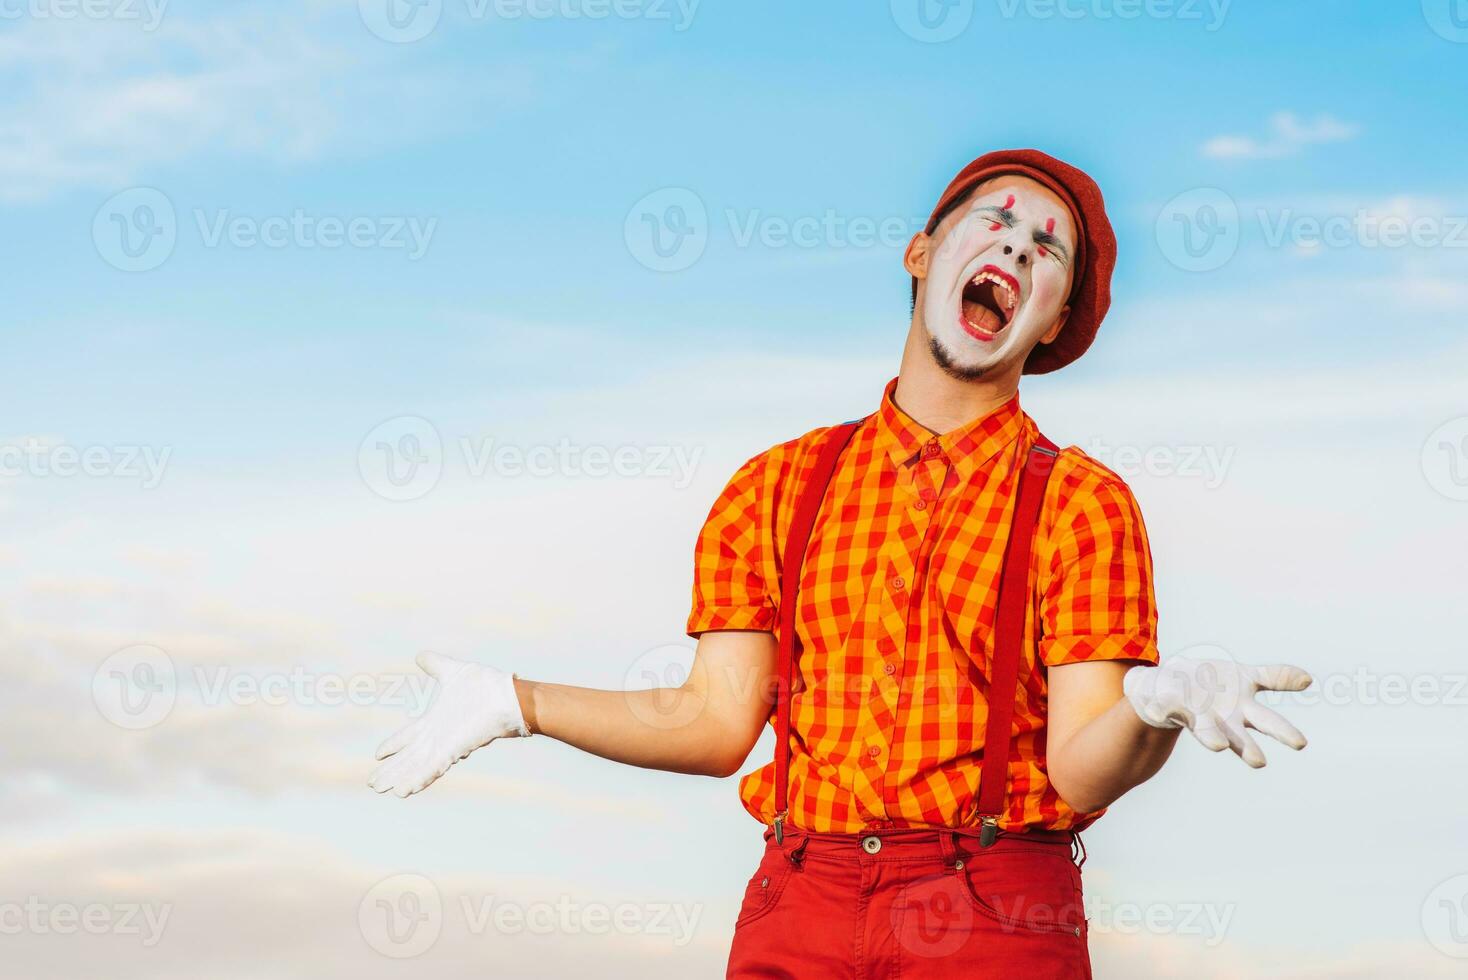 Mime shows pantomime against the blue sky photo